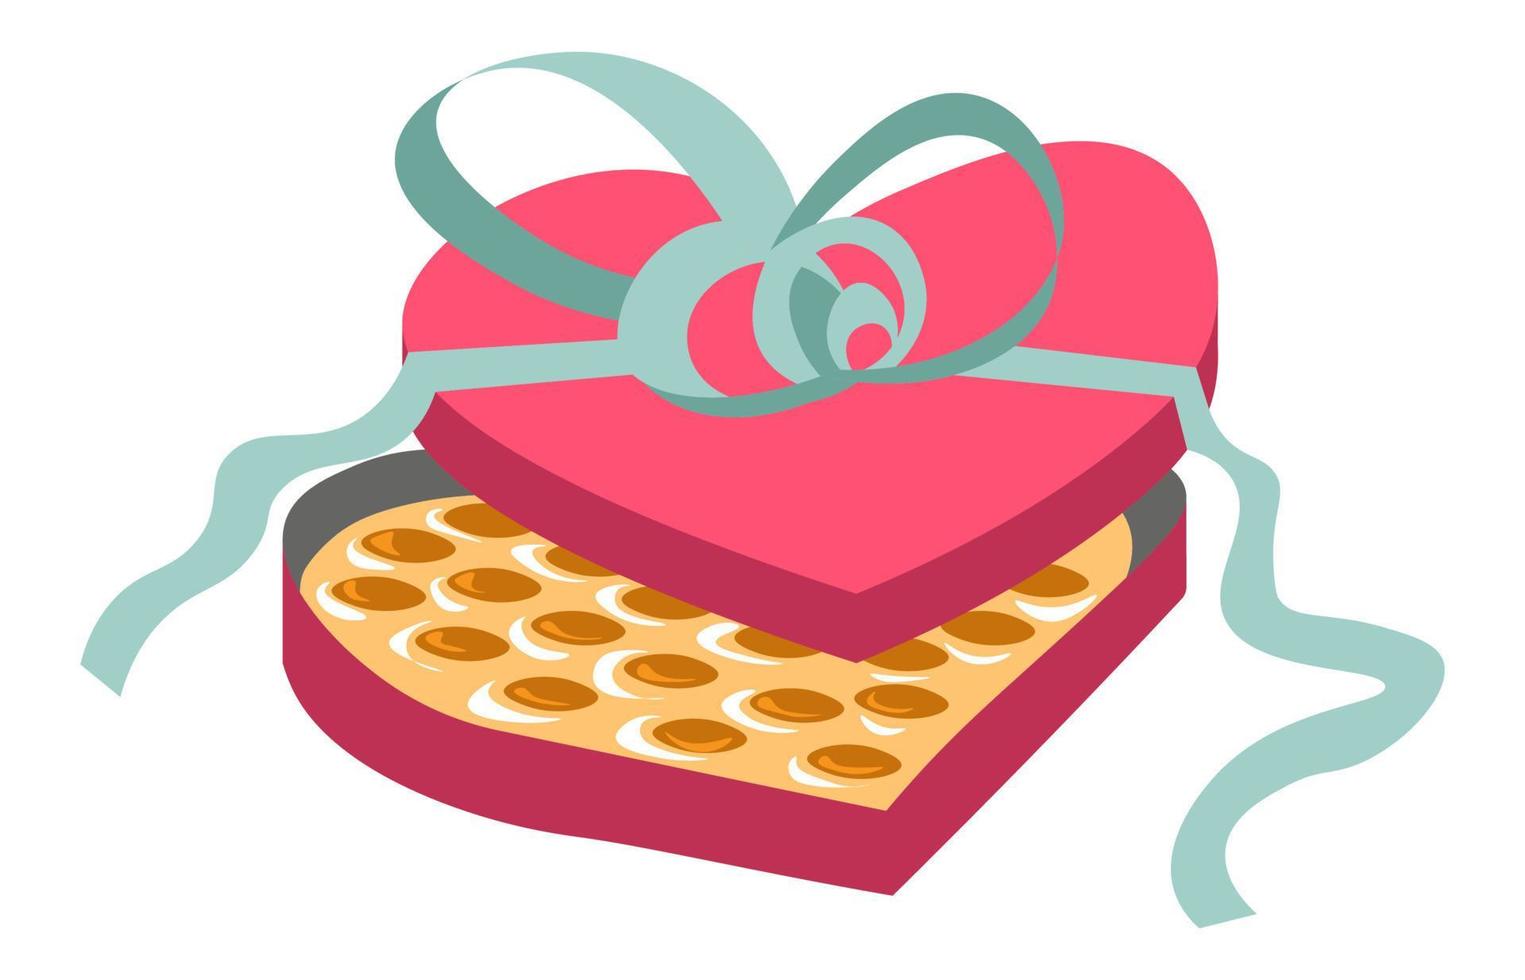 Sweets in heart shaped box, present for holiday vector